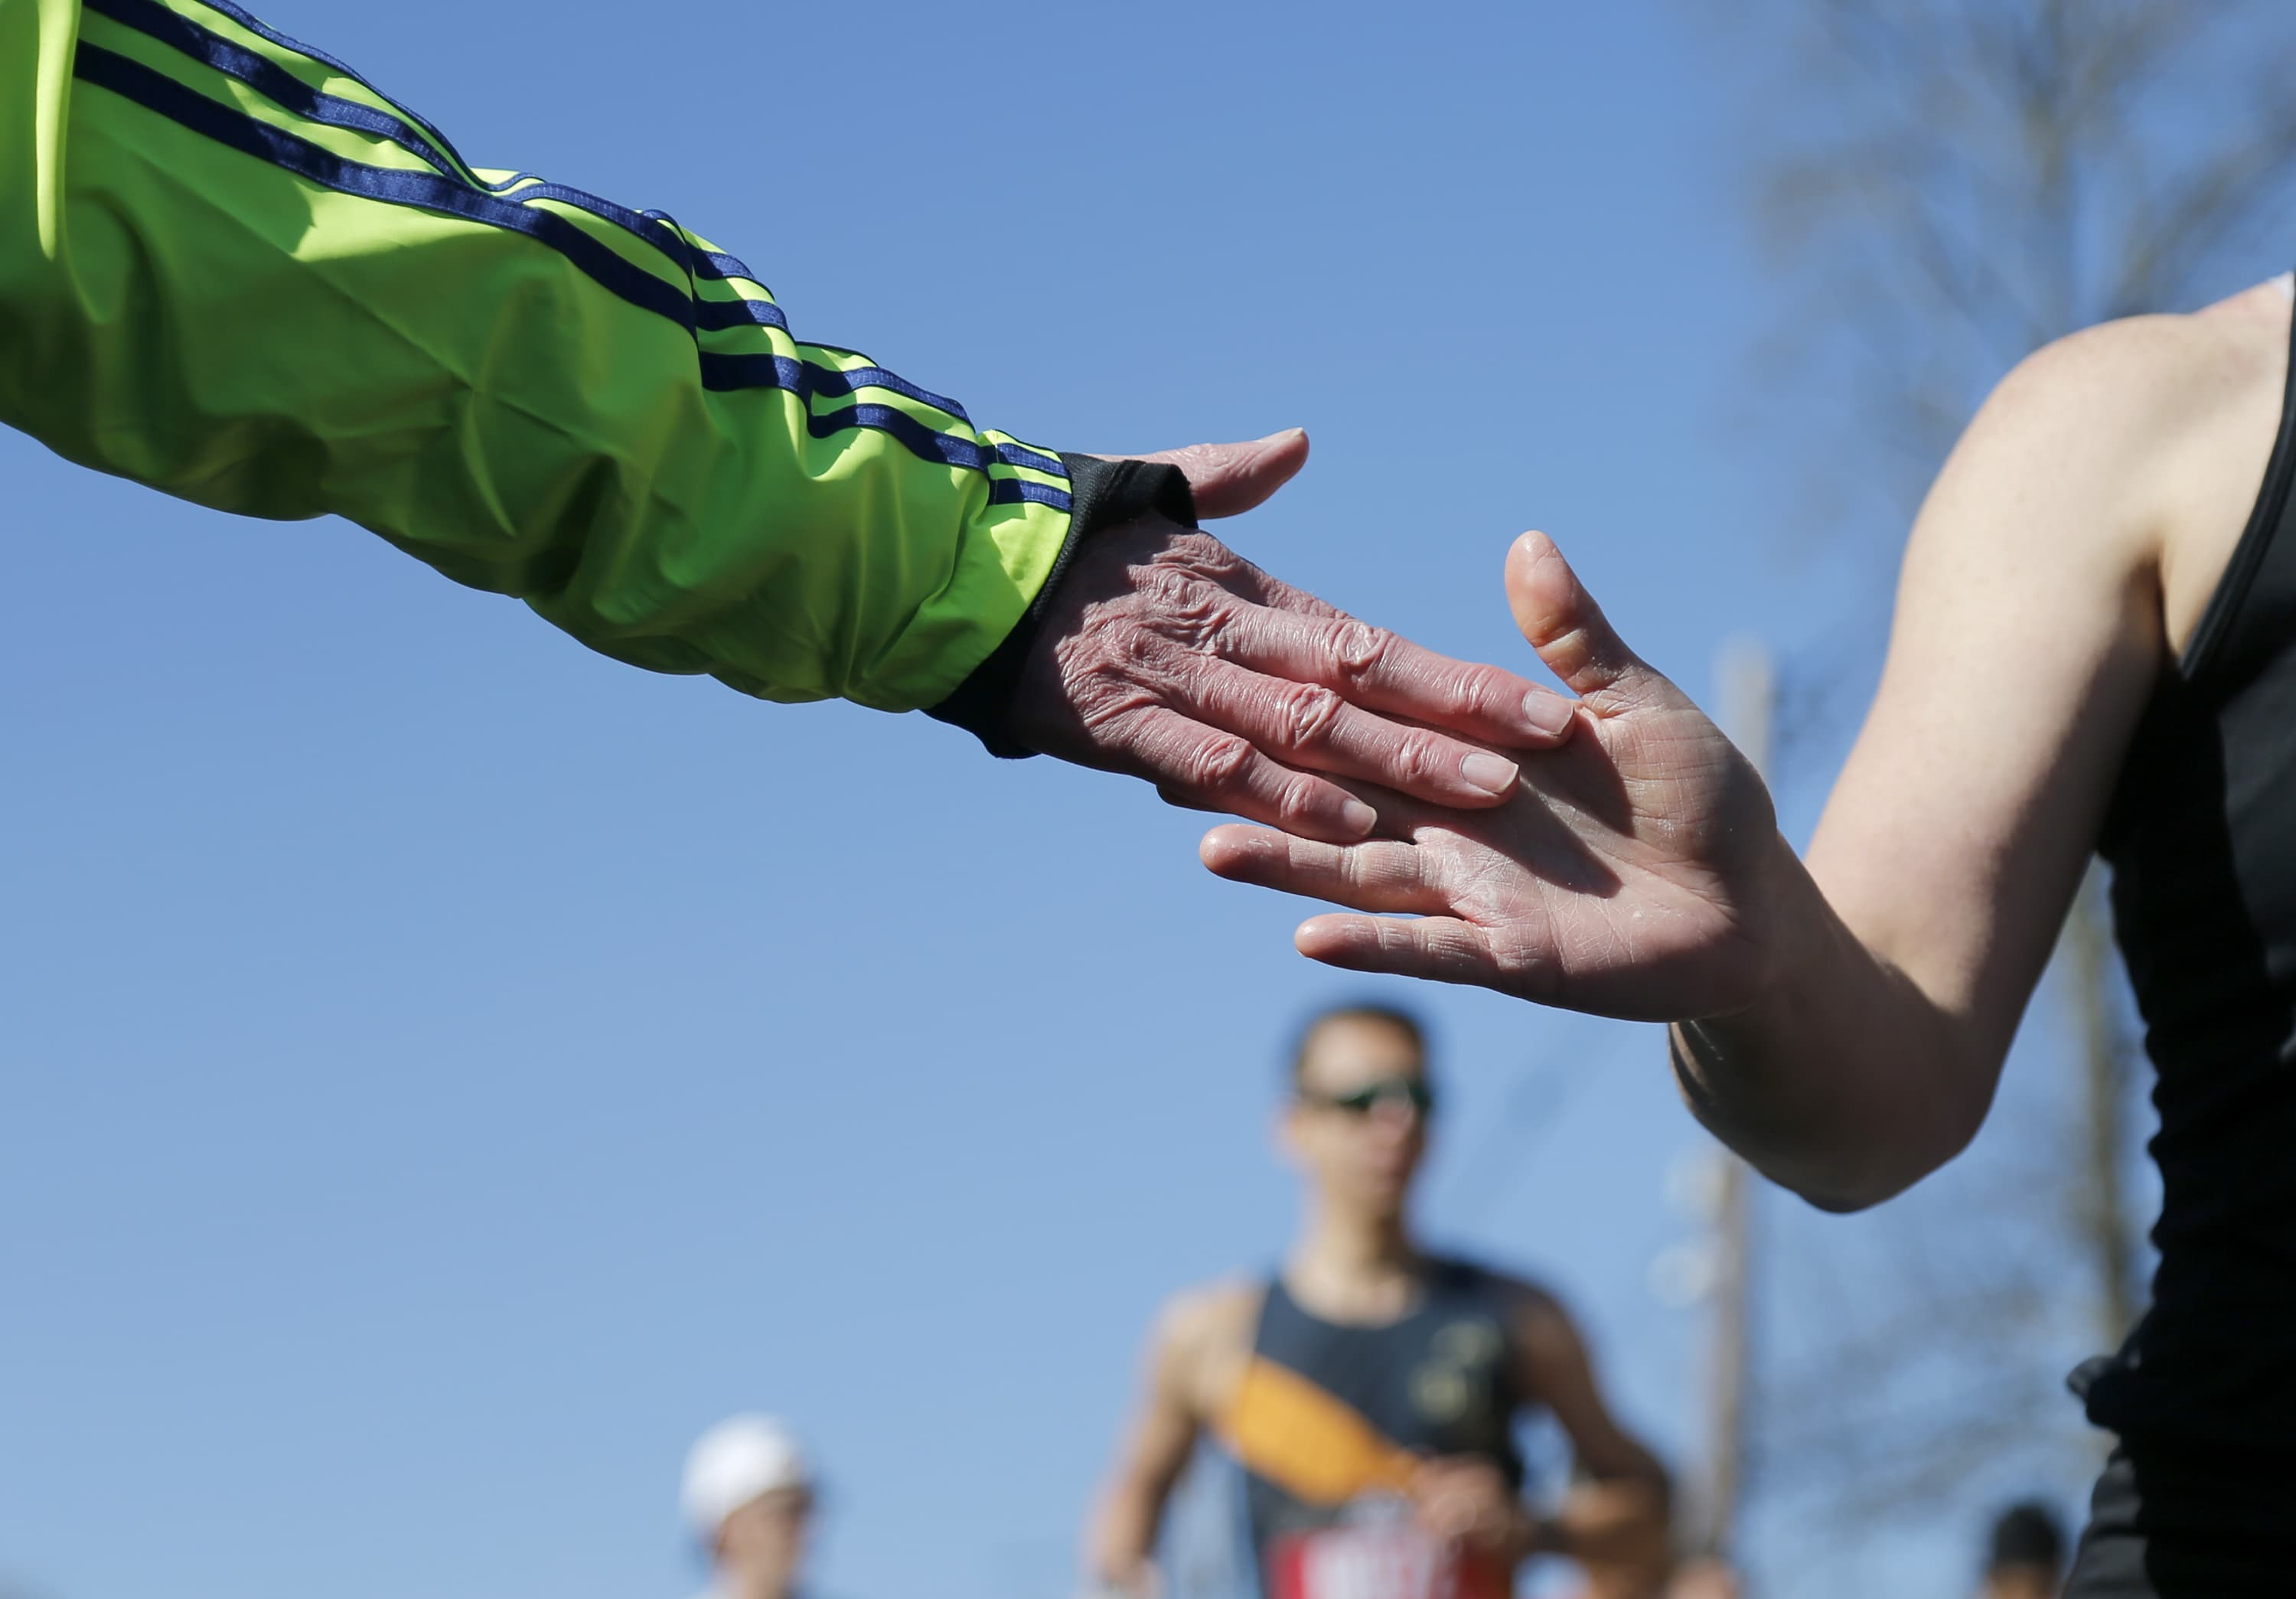 A volunteer offers a high-five to a runner during the 126th Boston Marathon. (Mary Schwalm/AP)